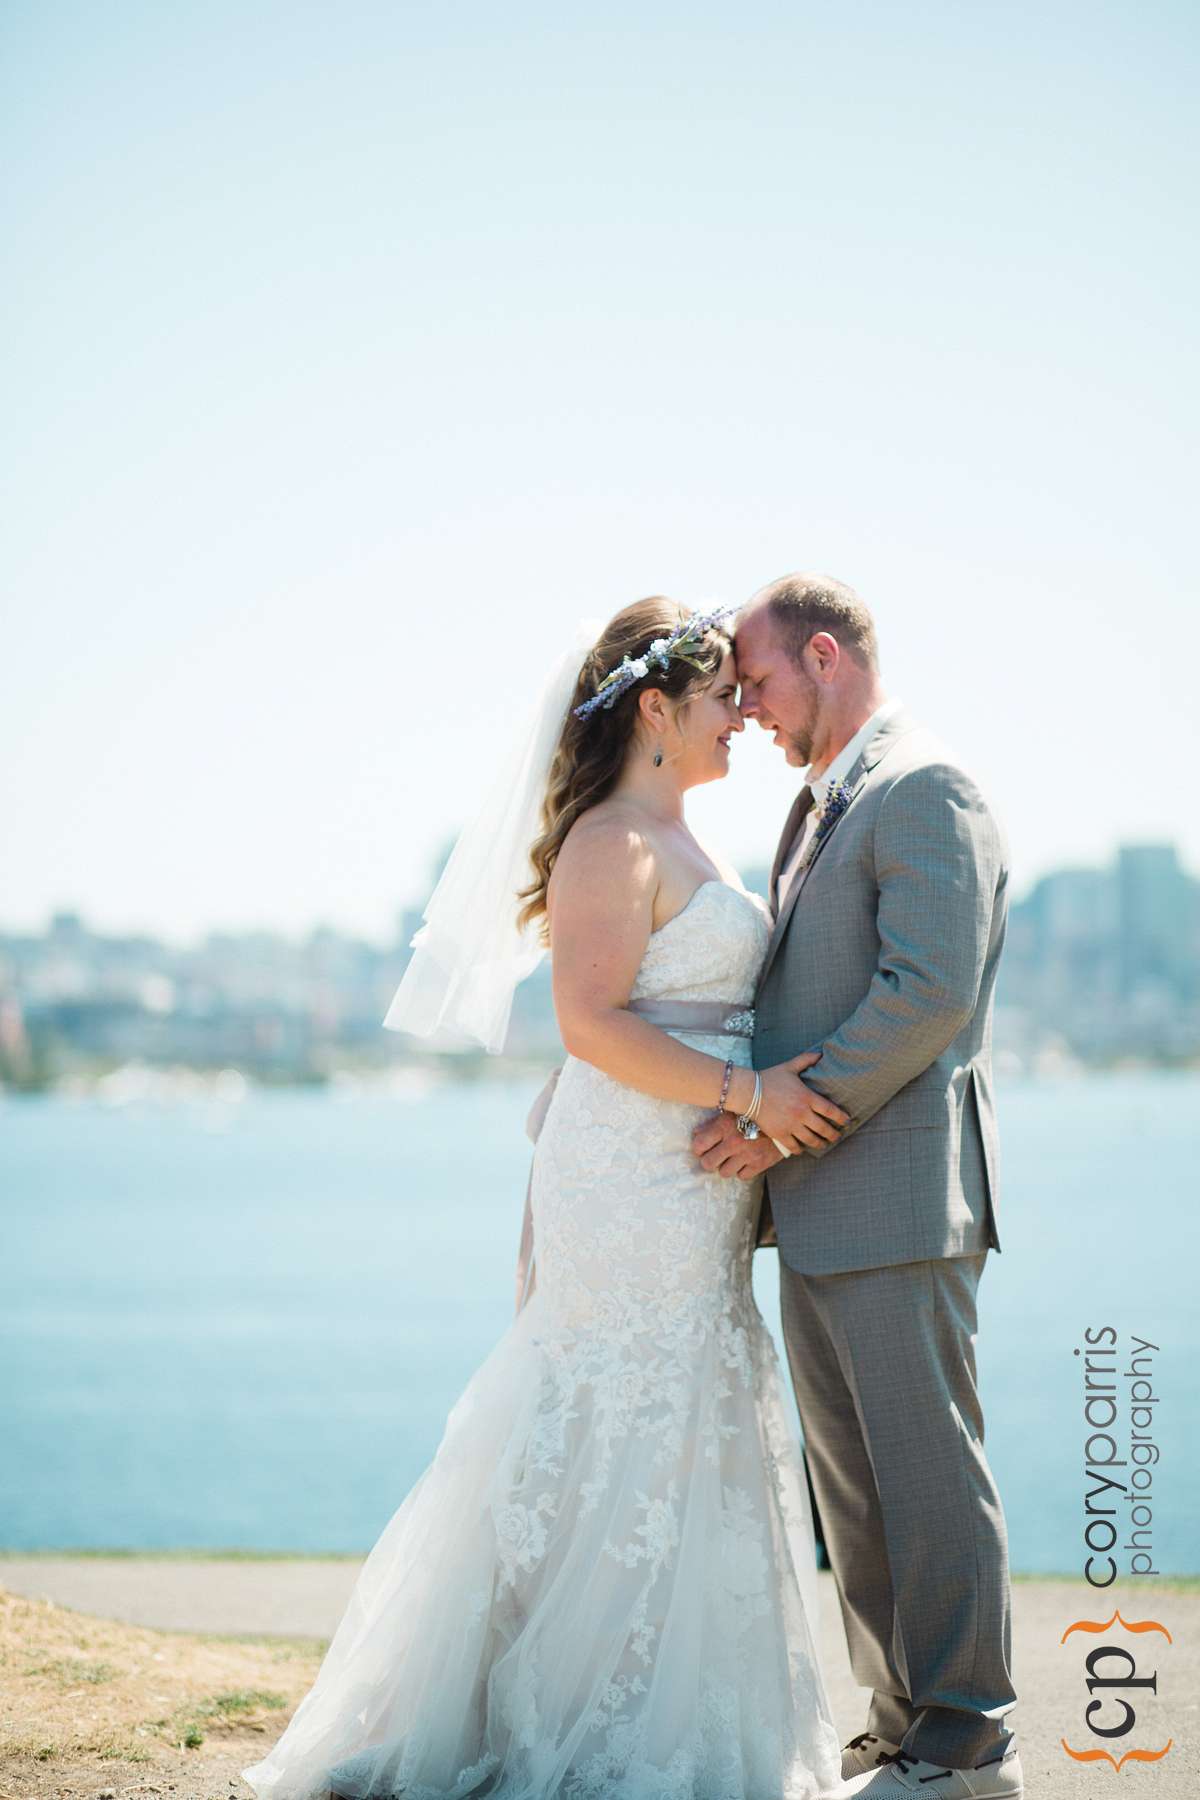 Wedding photography at Gas Works Park